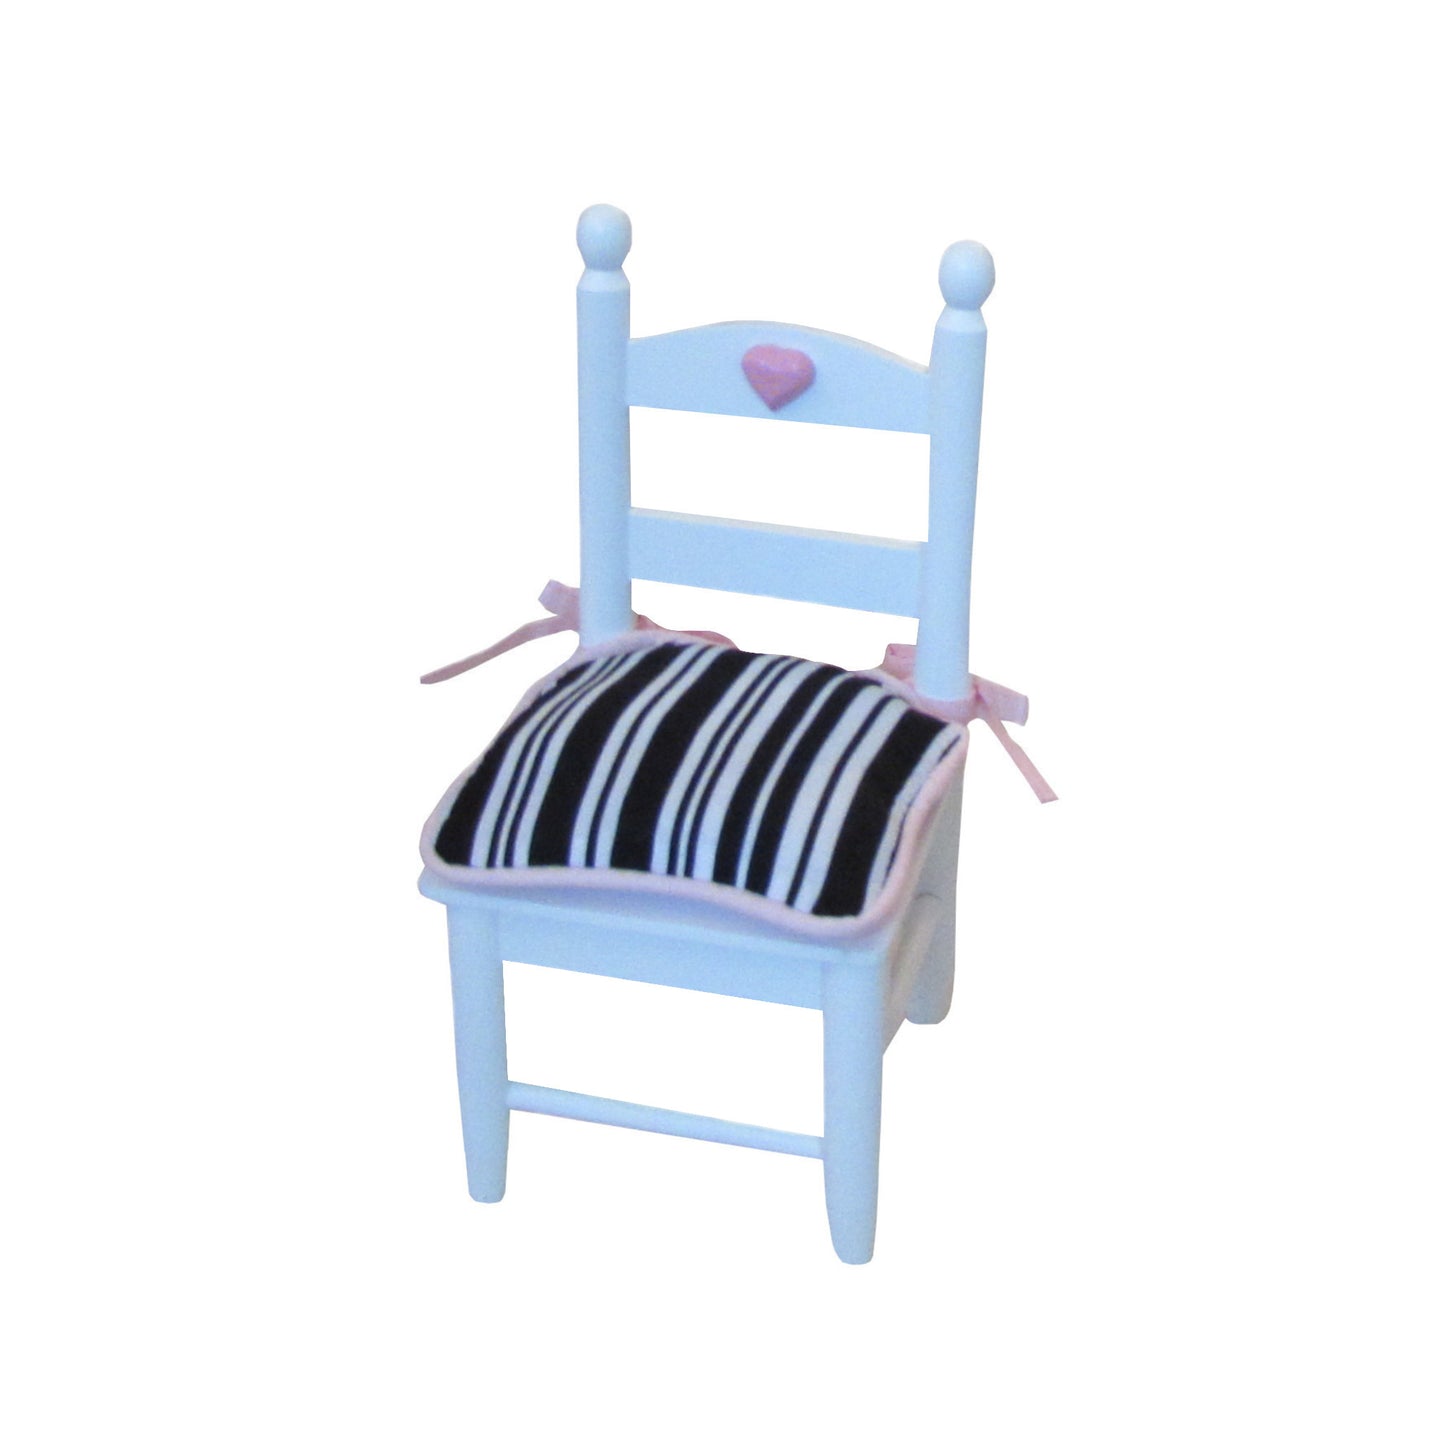 Black and White Stripe Doll Chair Cushion for 18-inch dolls